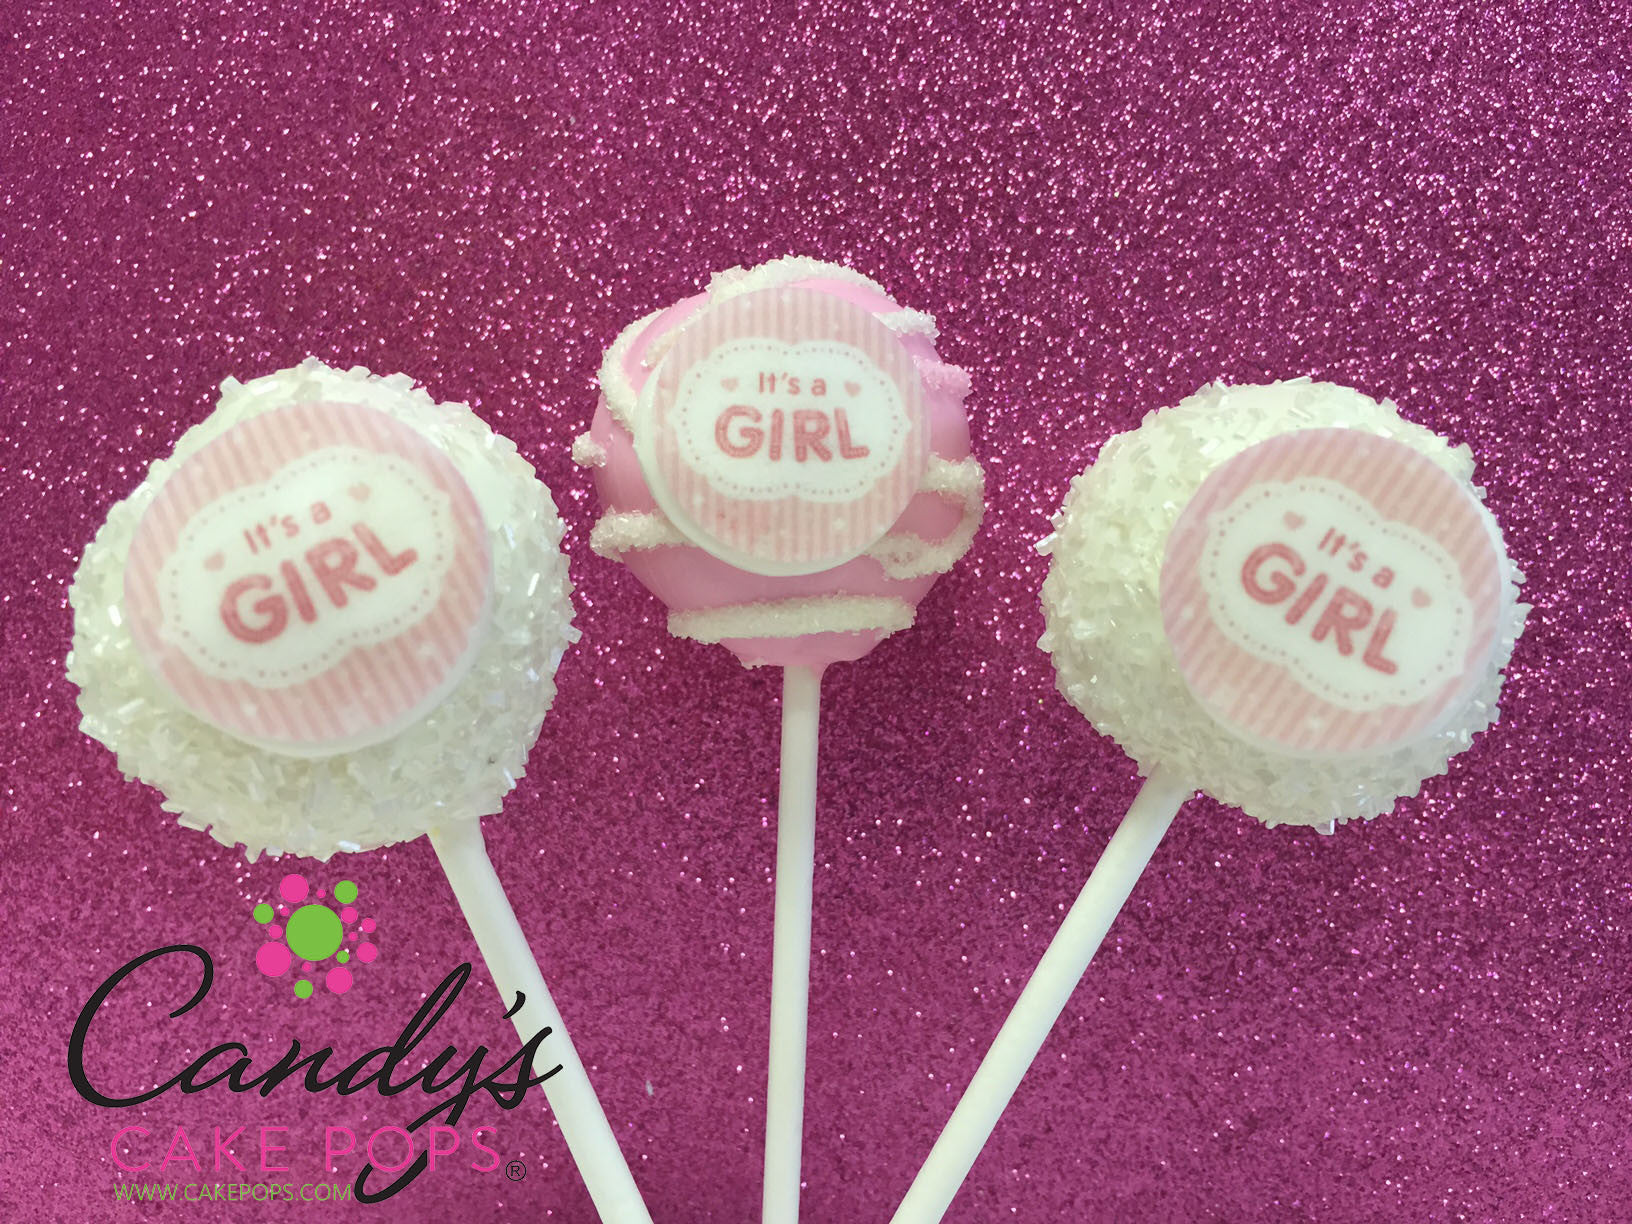 It's A Girl Edible Decal Cake Pops Baby Shower